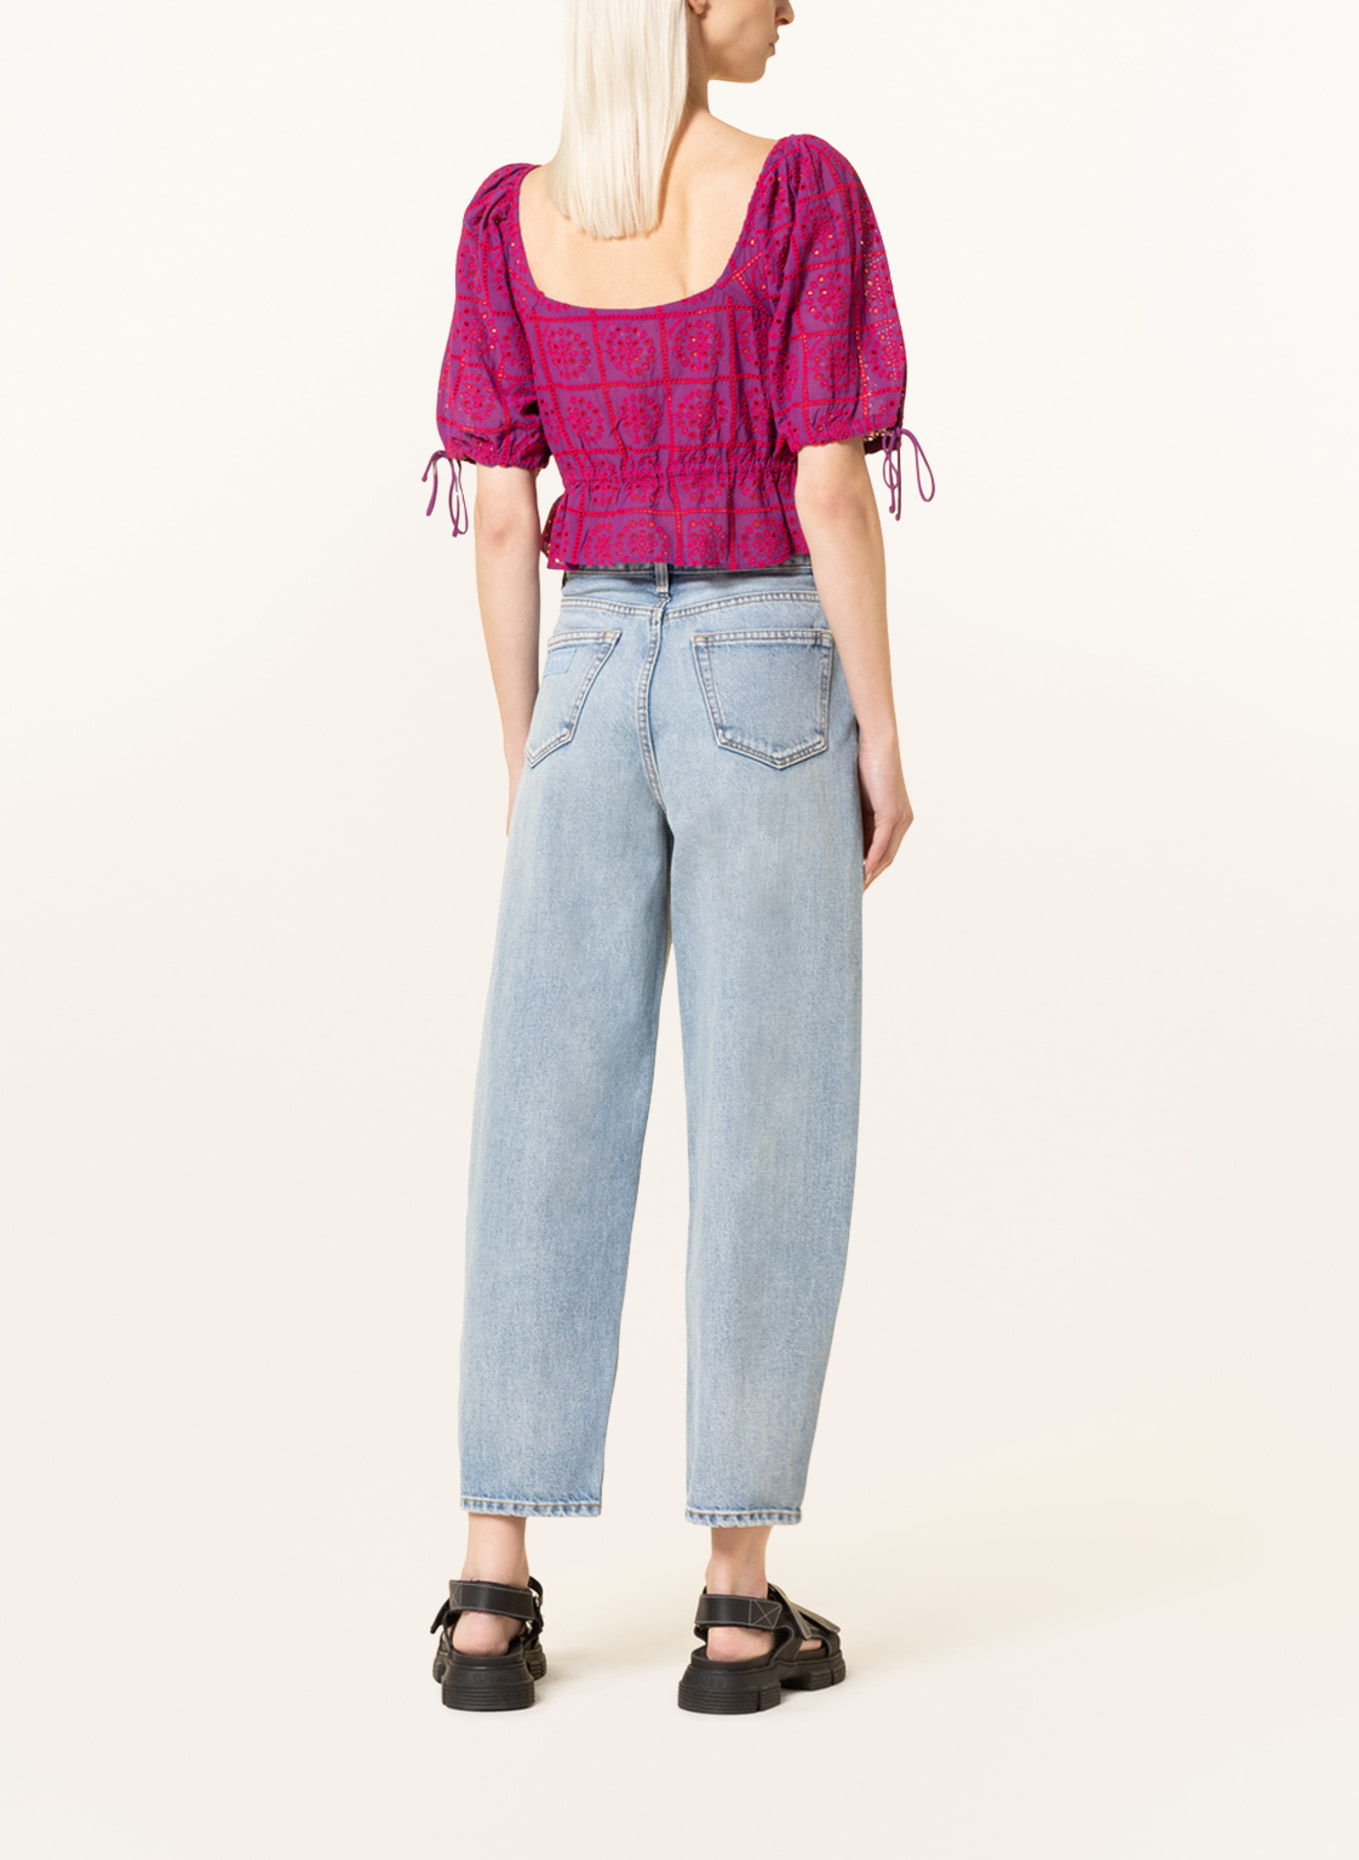 GANNI Cropped shirt blouse made of lace, Color: PURPLE/ PINK (Image 3)